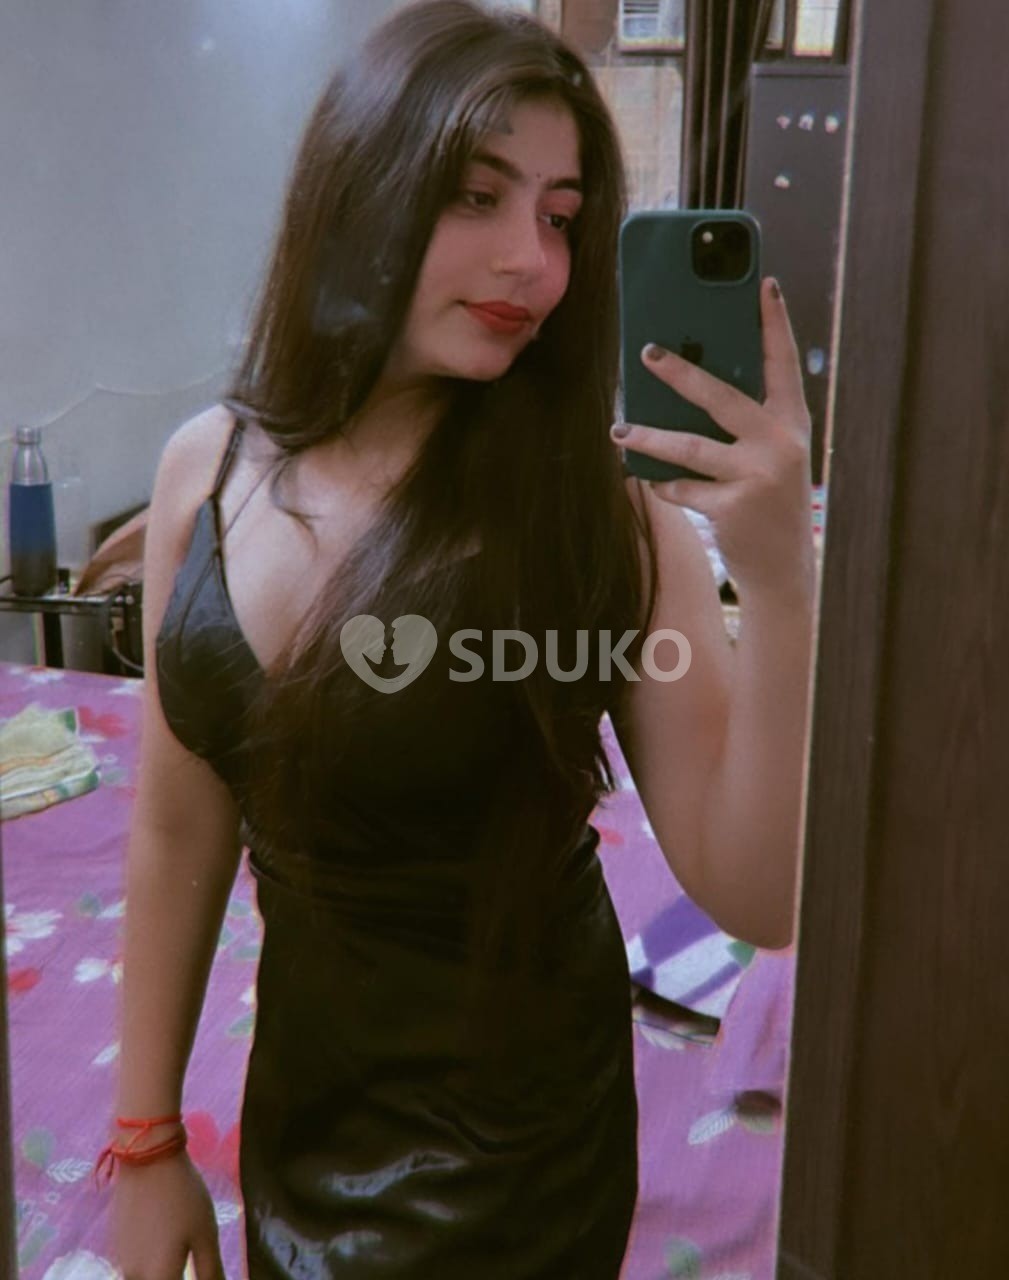 Bahadurgarh ⭐ ⭐ Best Vvip High Profile College And Bhabhis Safe Escort Service Available